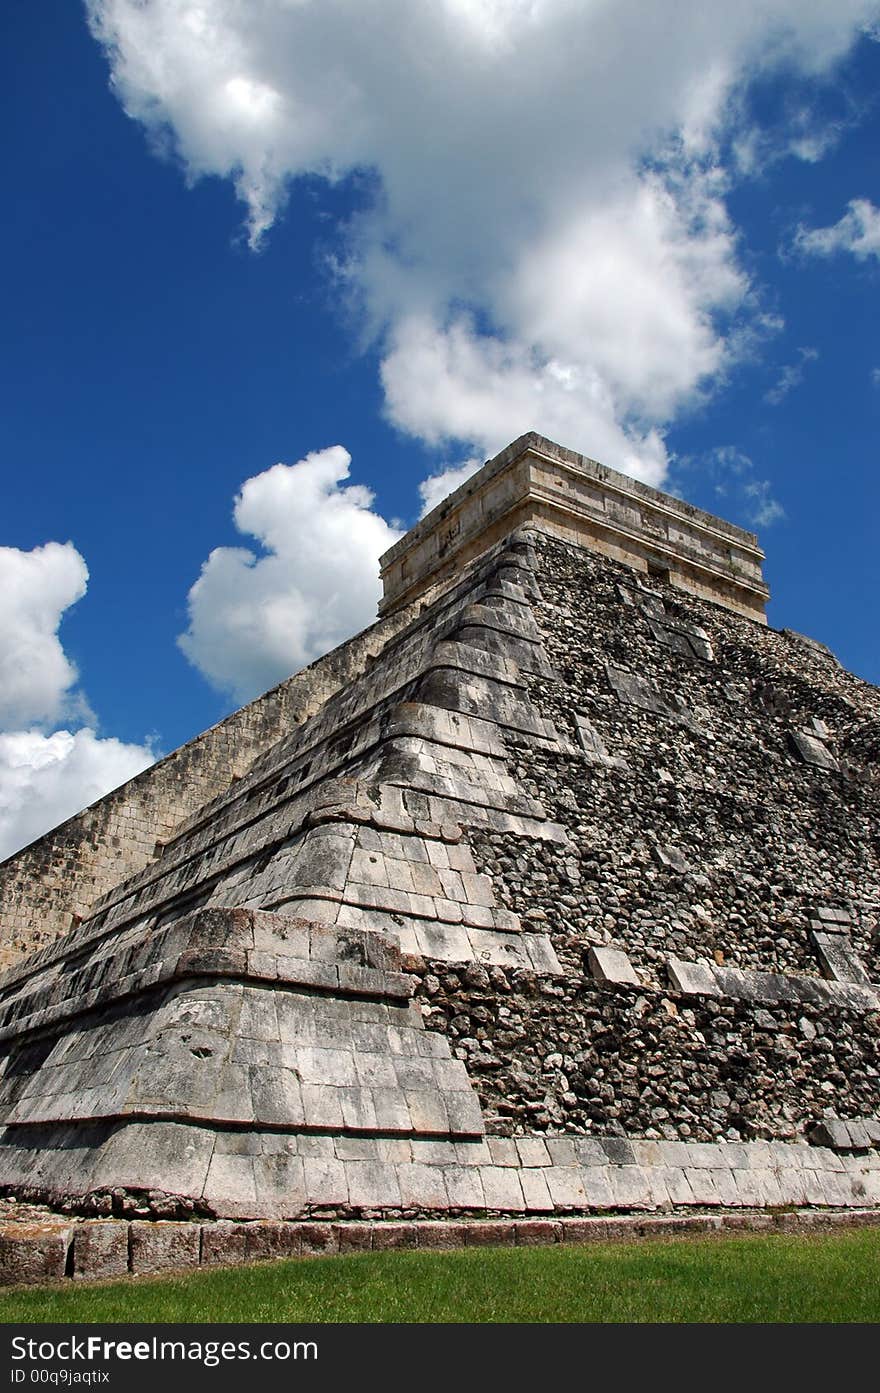 View of Ancient Mayan Pyramid in Chichen Itza